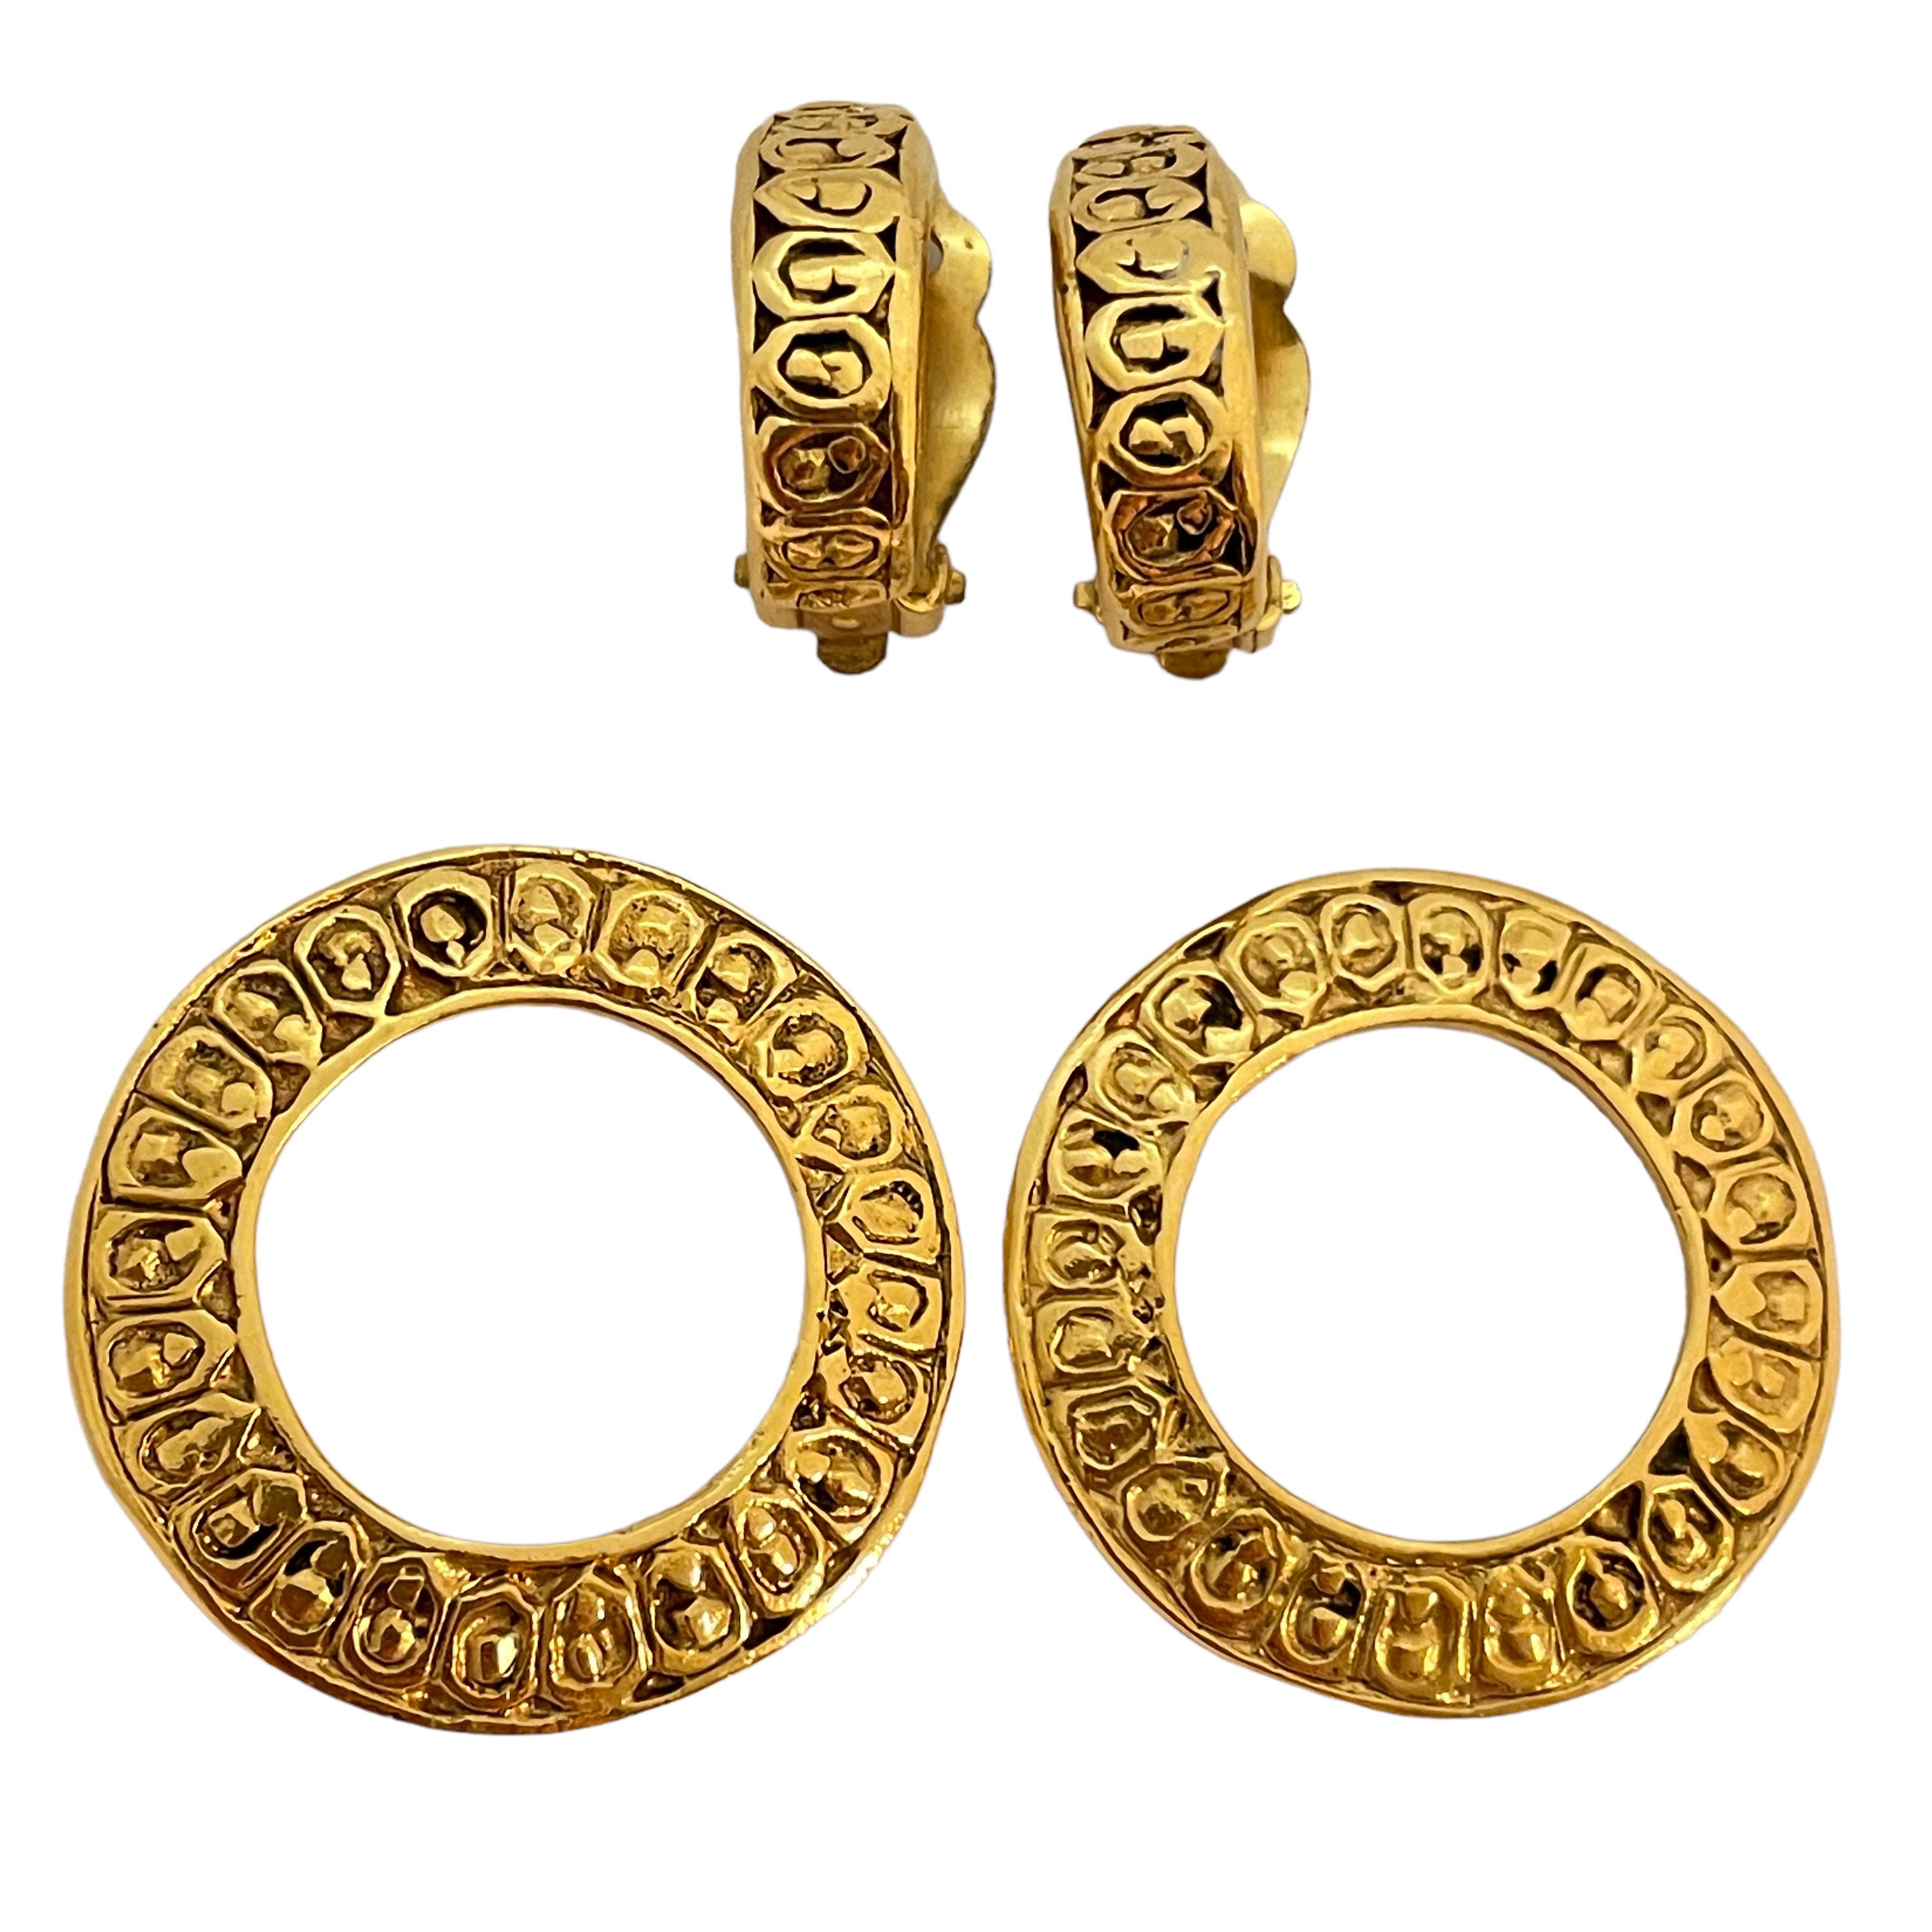 Vtg CHANEL Made in France gold door knocker clip on earrings In Good Condition For Sale In Palos Hills, IL